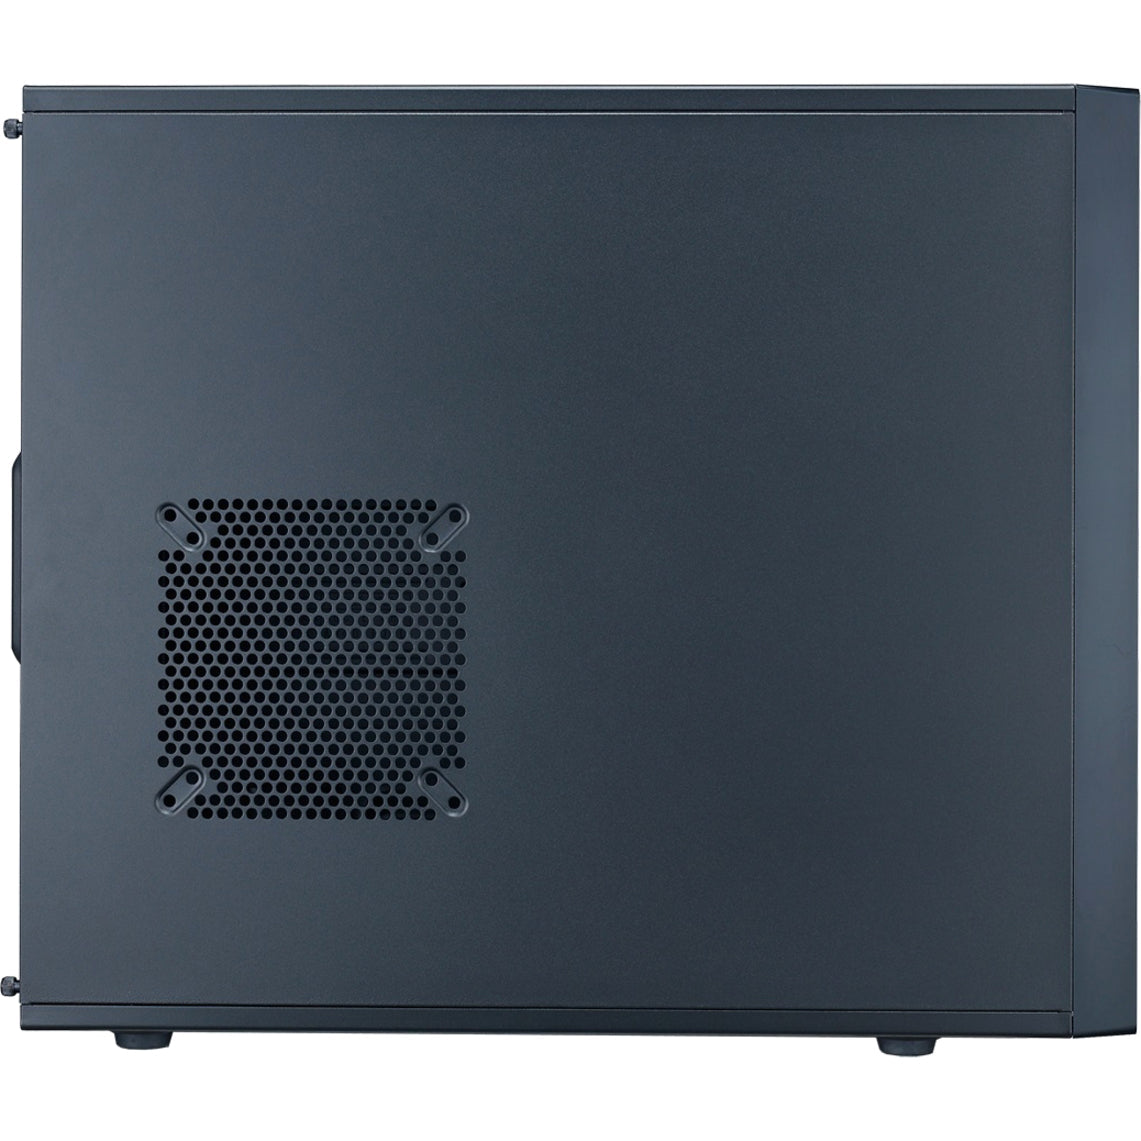 Cooler Master N400 N-Series Mid Tower Computer Case with Fully Meshed Front Panel